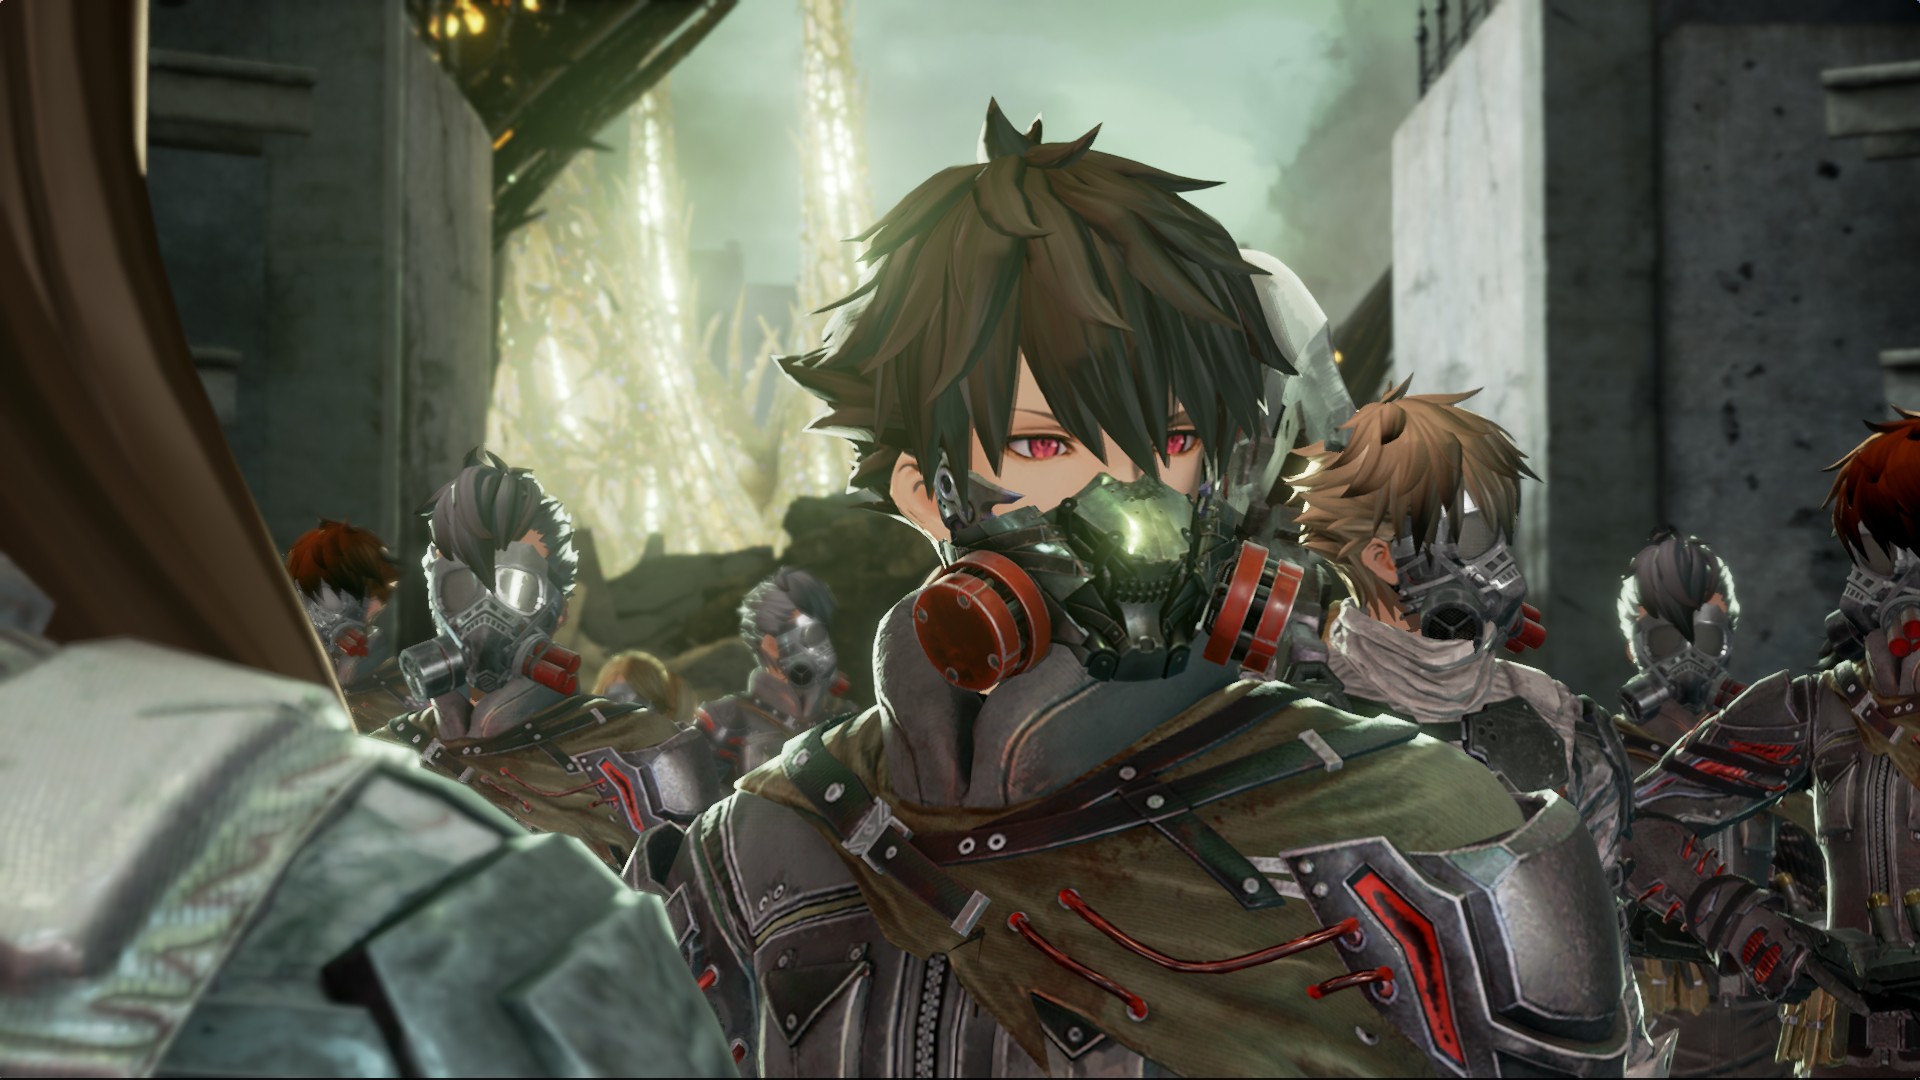 Anime Dark Souls-Styled Game Code Vein Coming in 2018